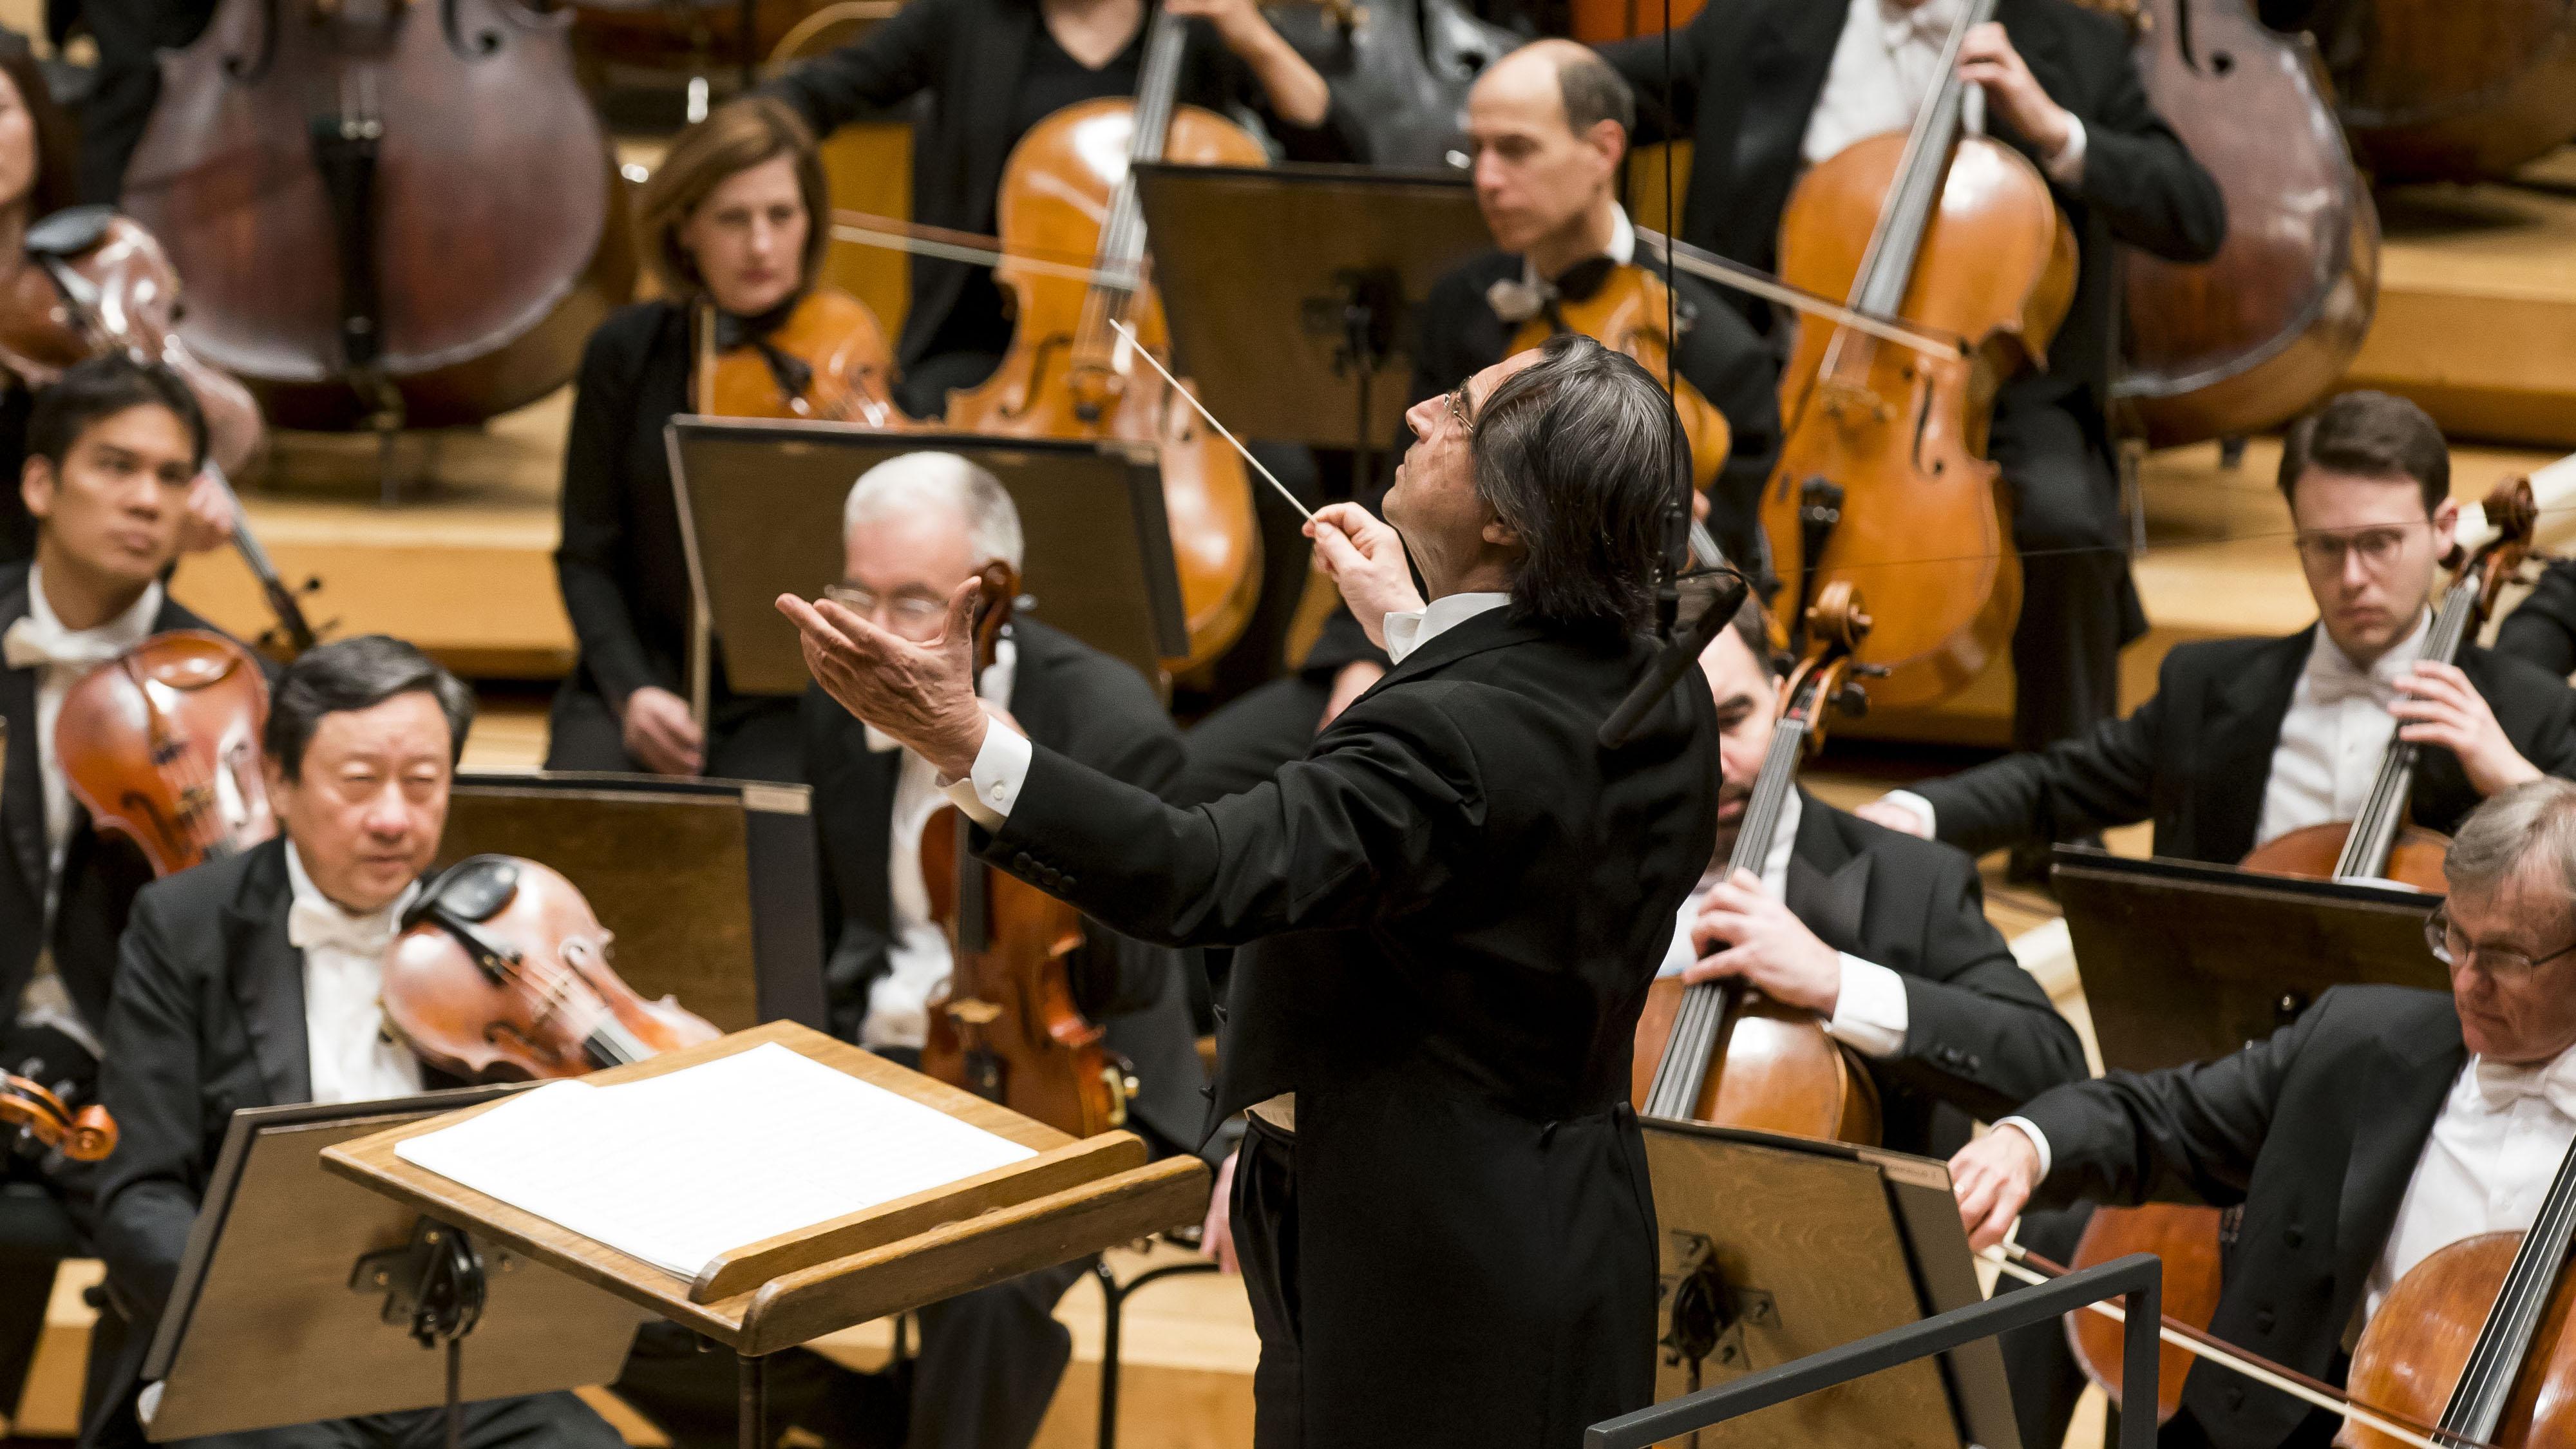 Zell Music Director Riccardo Muti leads the Chicago Symphony Orchestra in a program of works by Debussy and Tchaikovsky in the final weekend of his April residency at Symphony Center. (© Todd Rosenberg)